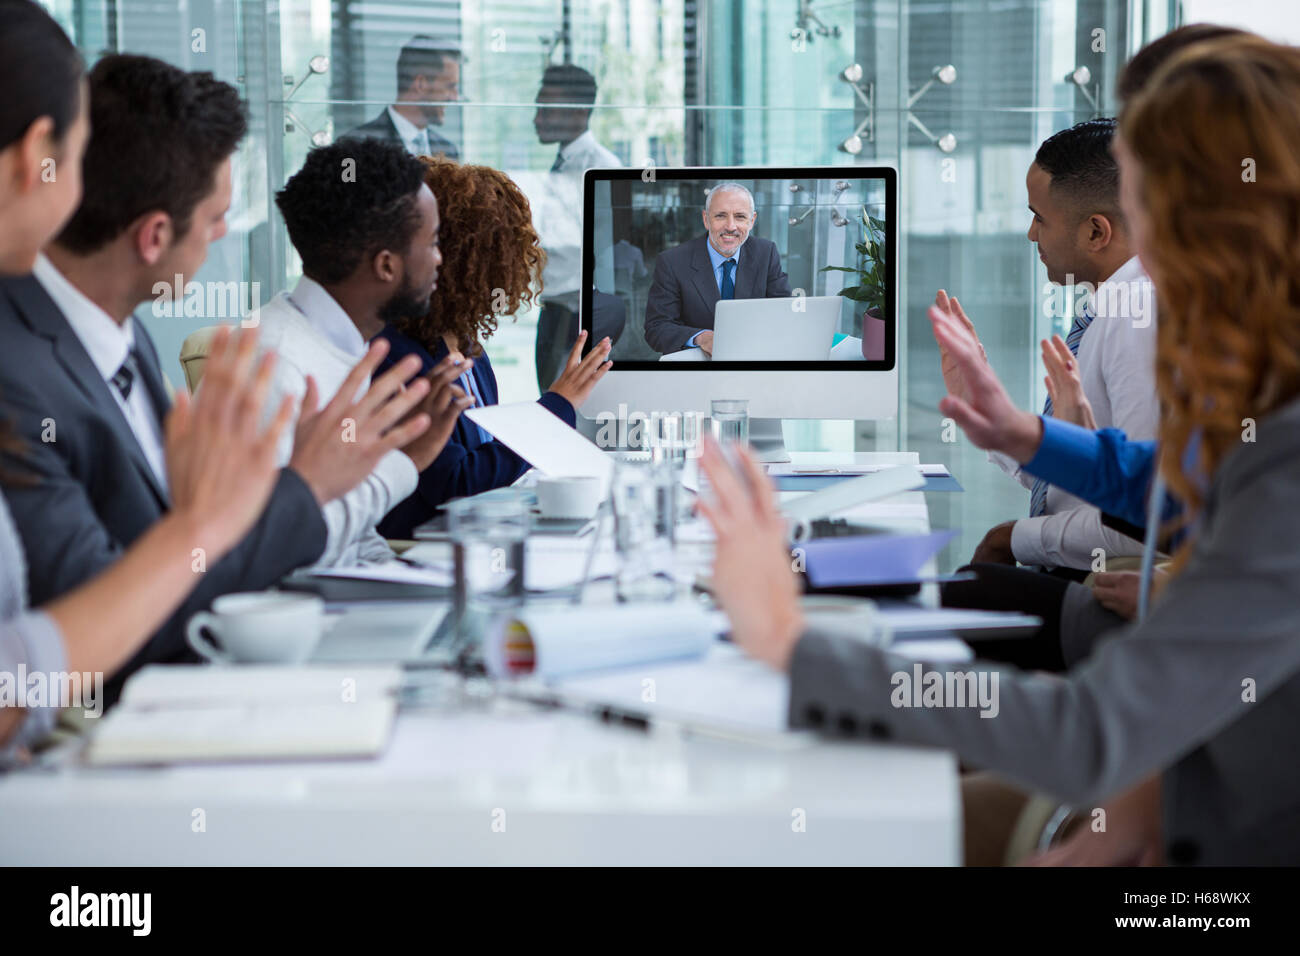 Business people looking at a screen during a video conference Stock Photo